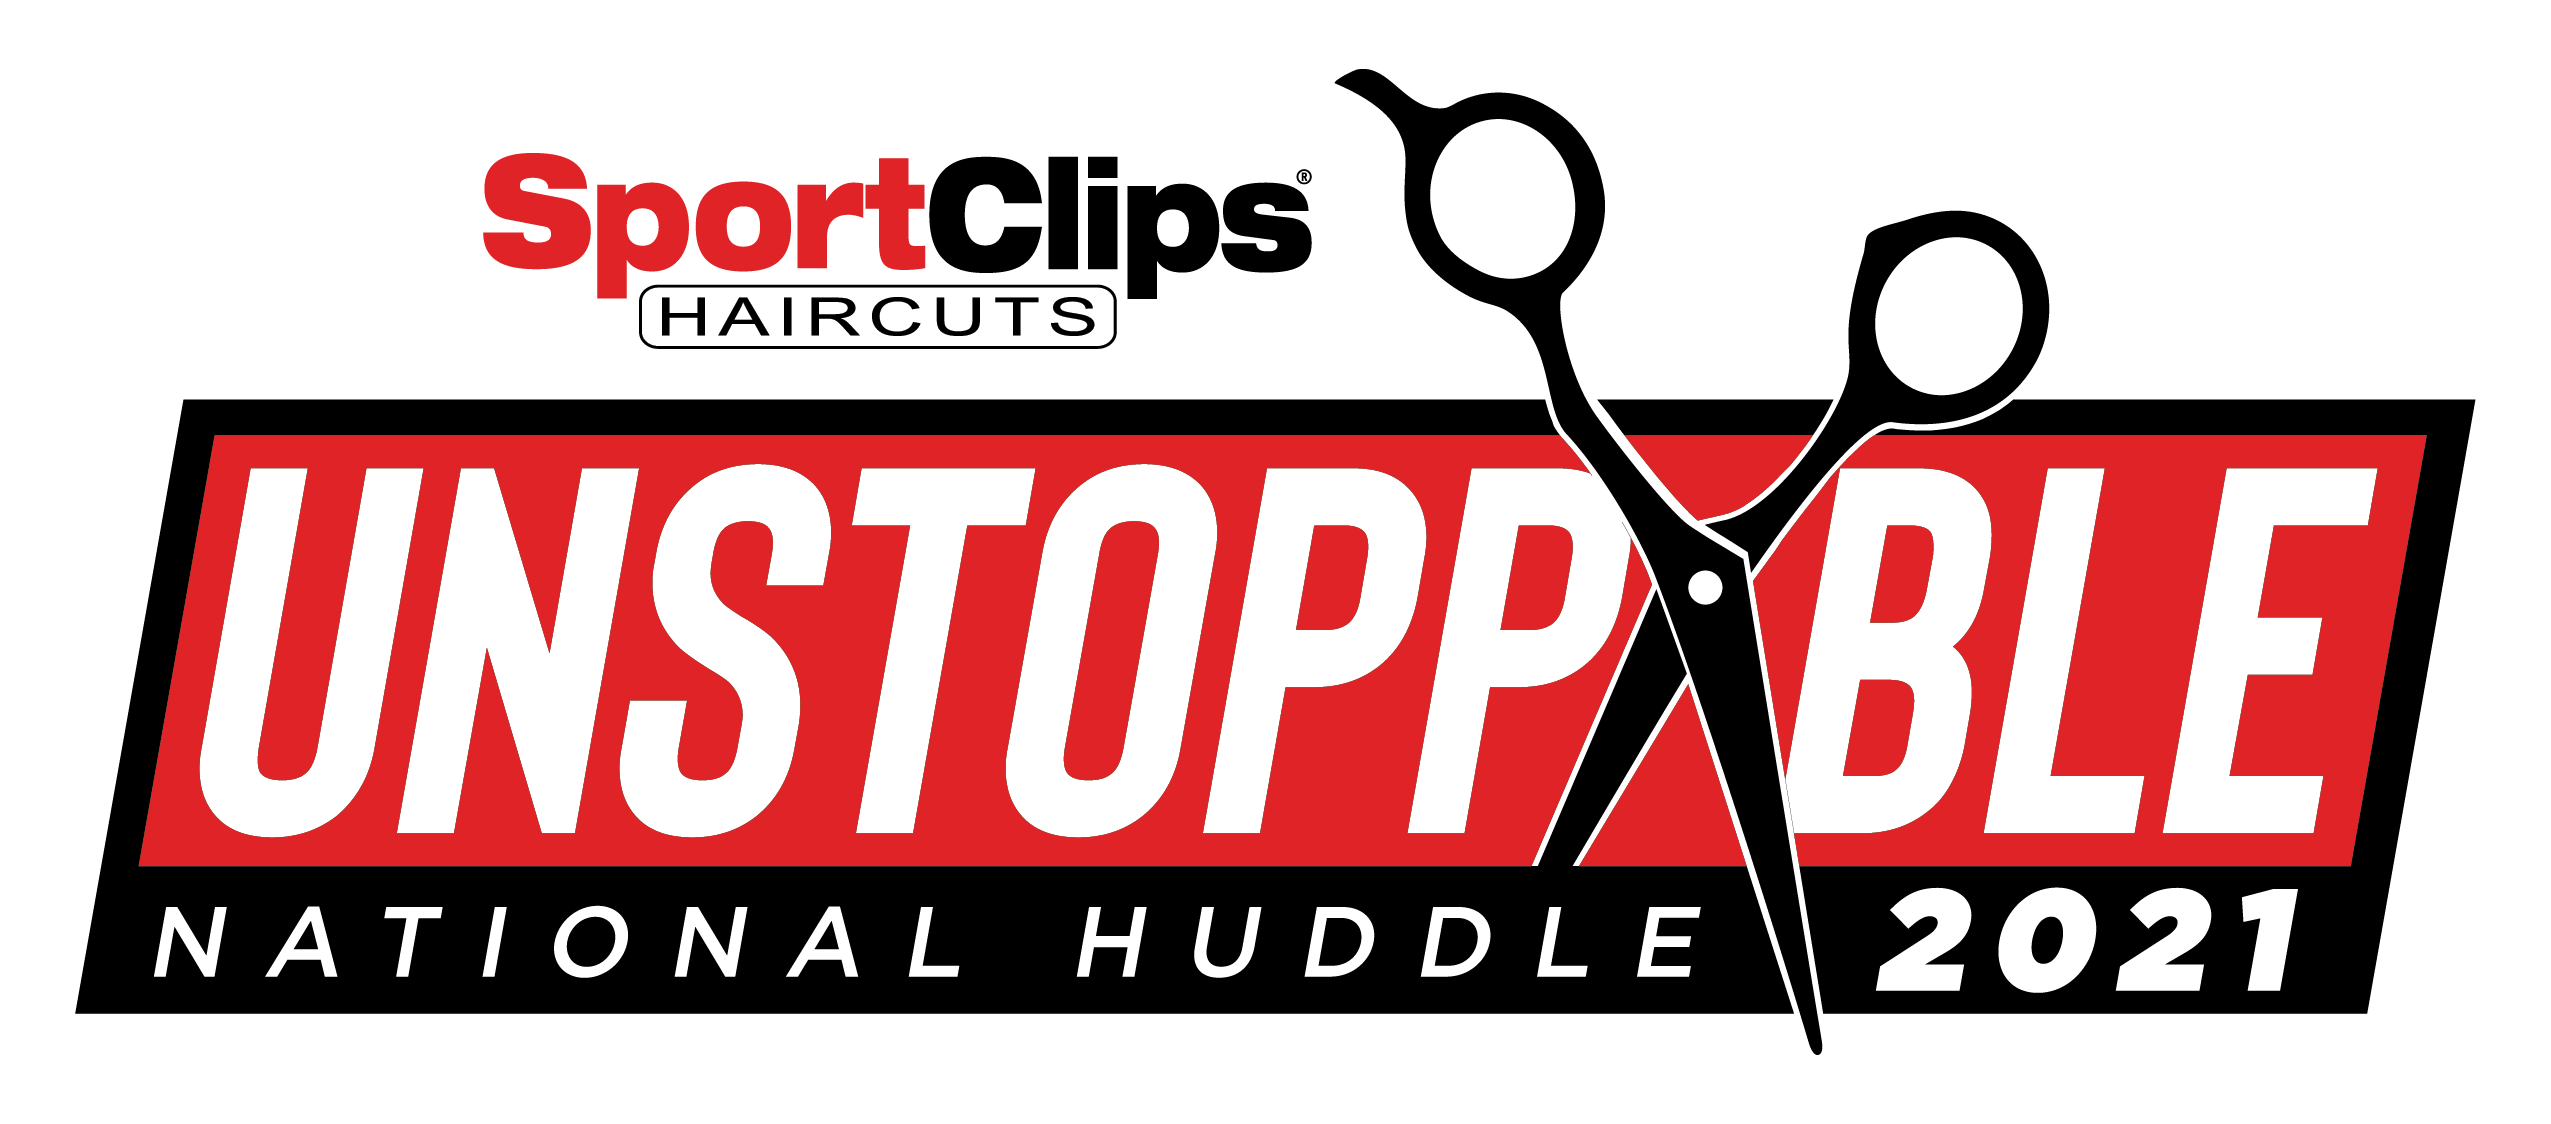 Sport Clips Haircuts' commitment to stylists is key to the franchise's